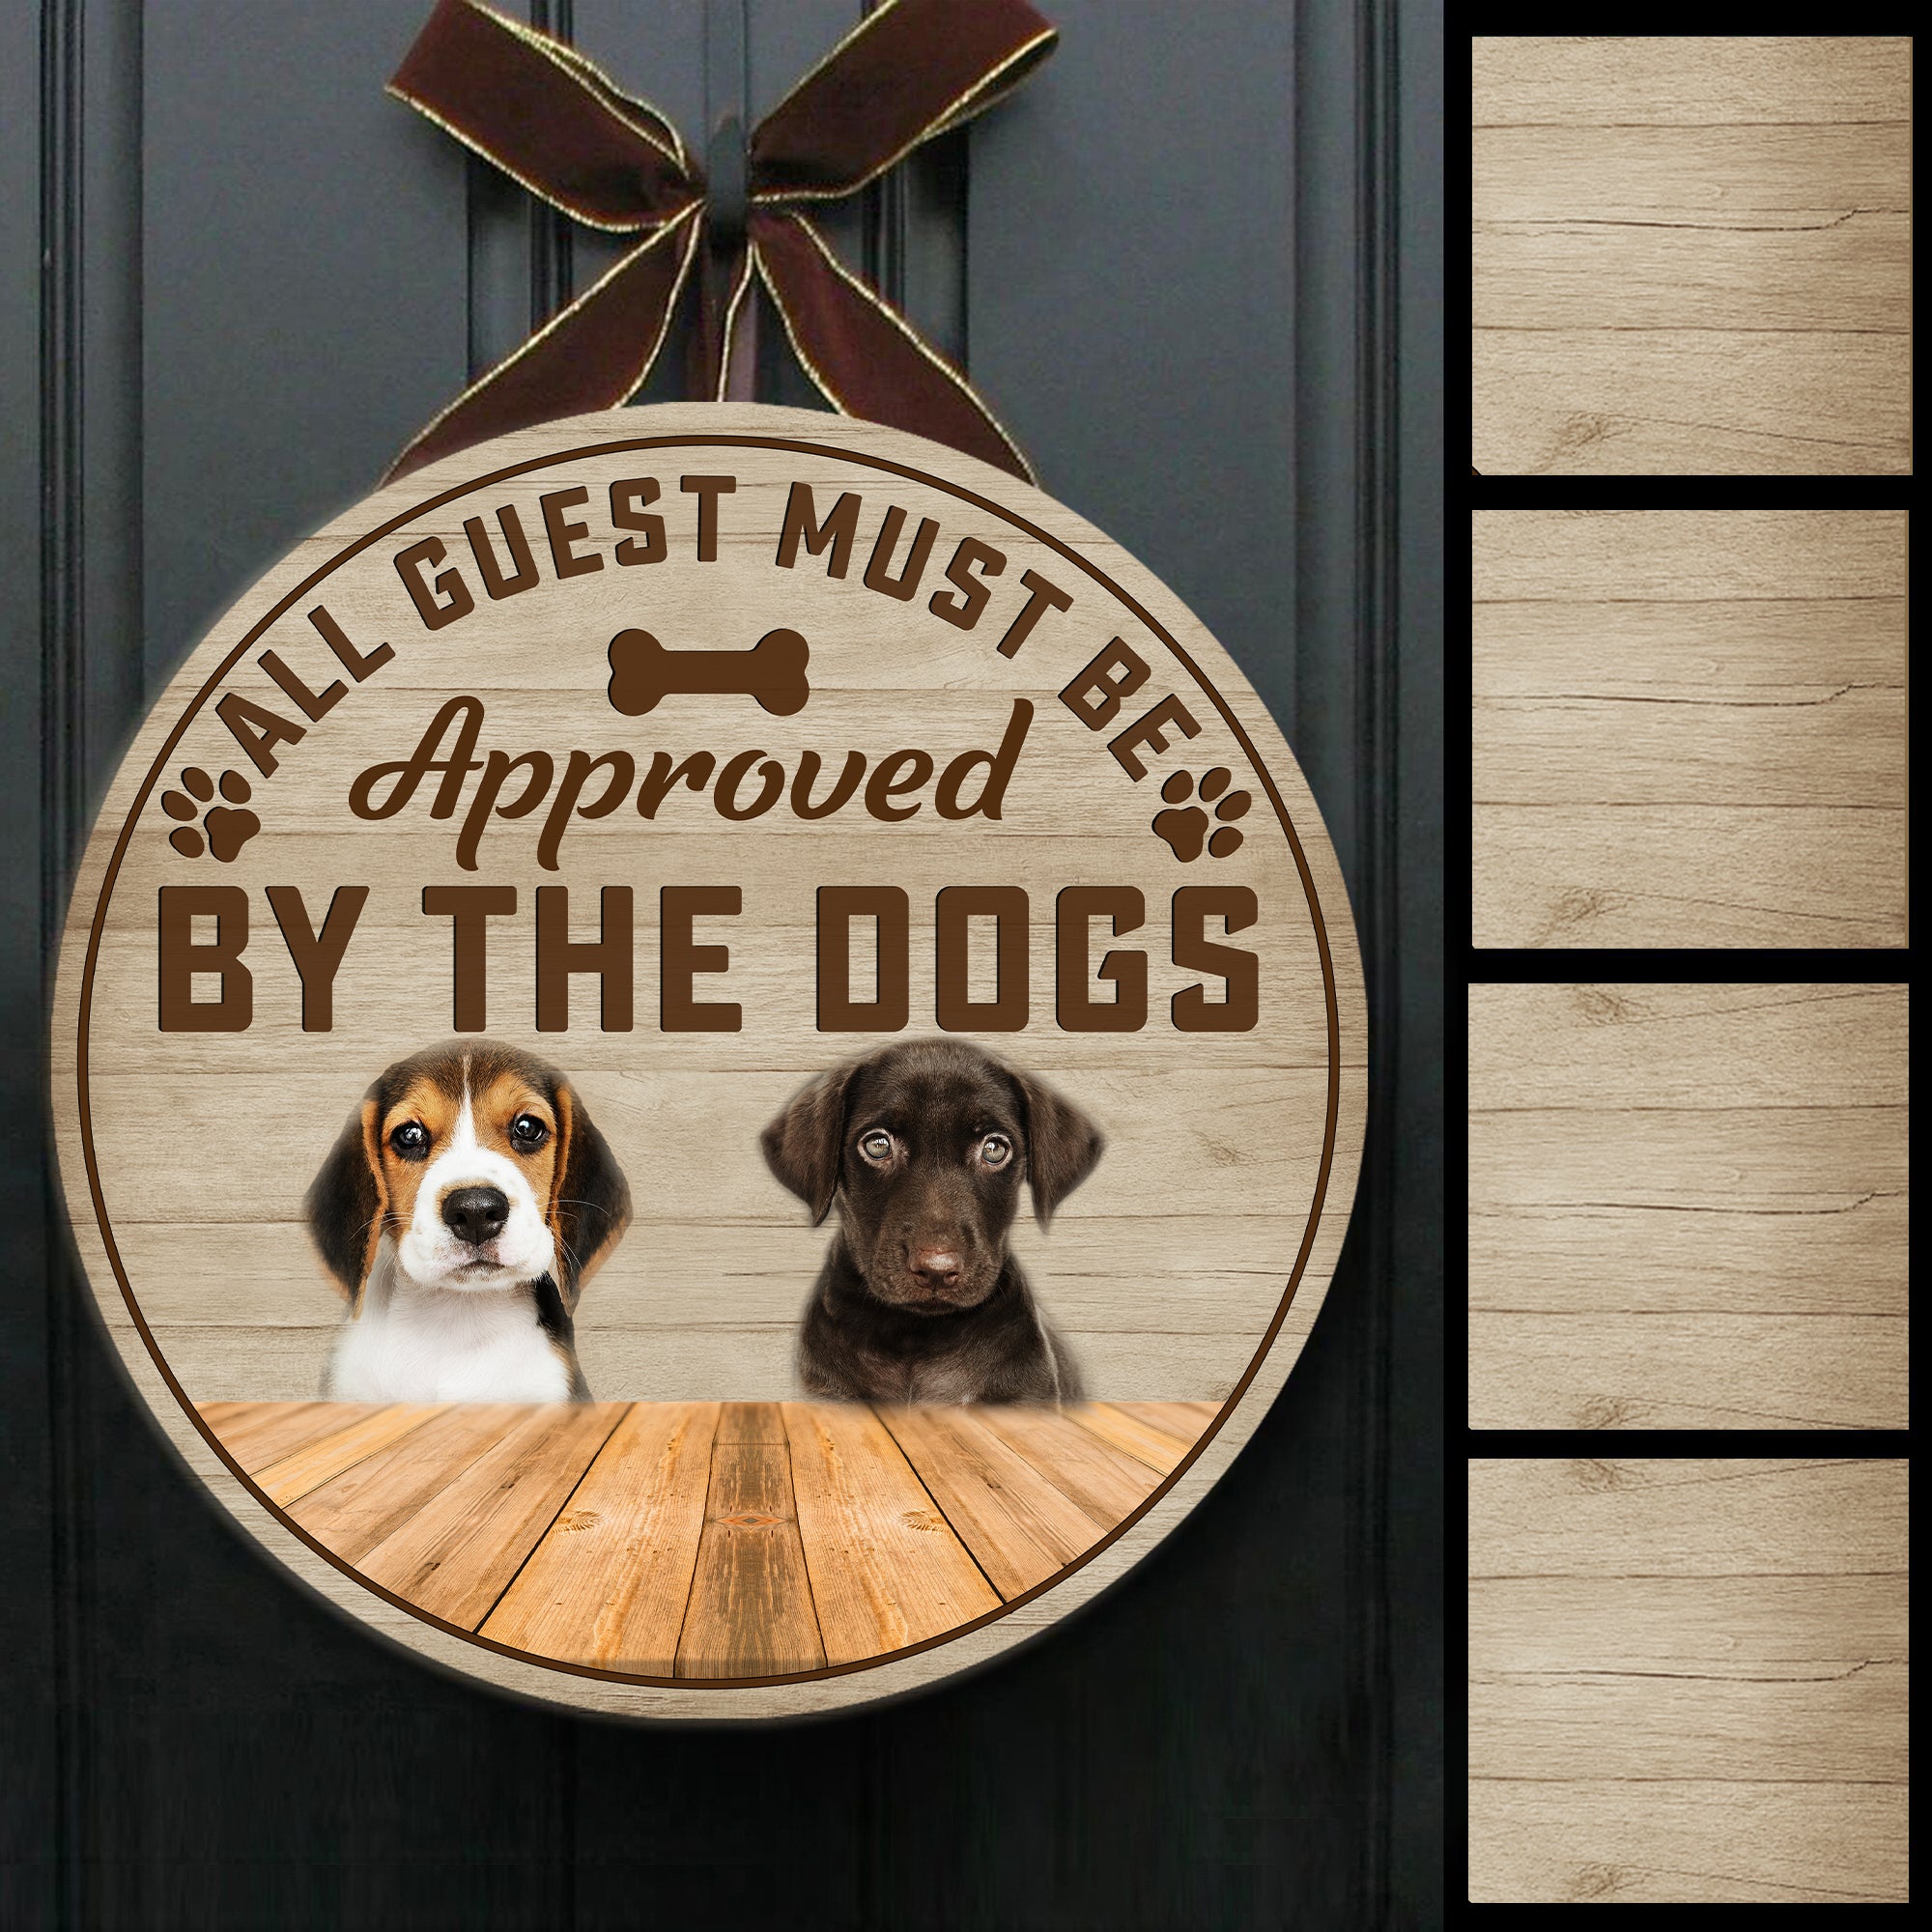 Personalized Dog Door Hanger| Approved By The Dogs - Wooden Welcome Sign Gift for Dog Lover, Dog Mom, Dog Dad| Dog Theme Decoration for Indoor Outdoor| JDH51